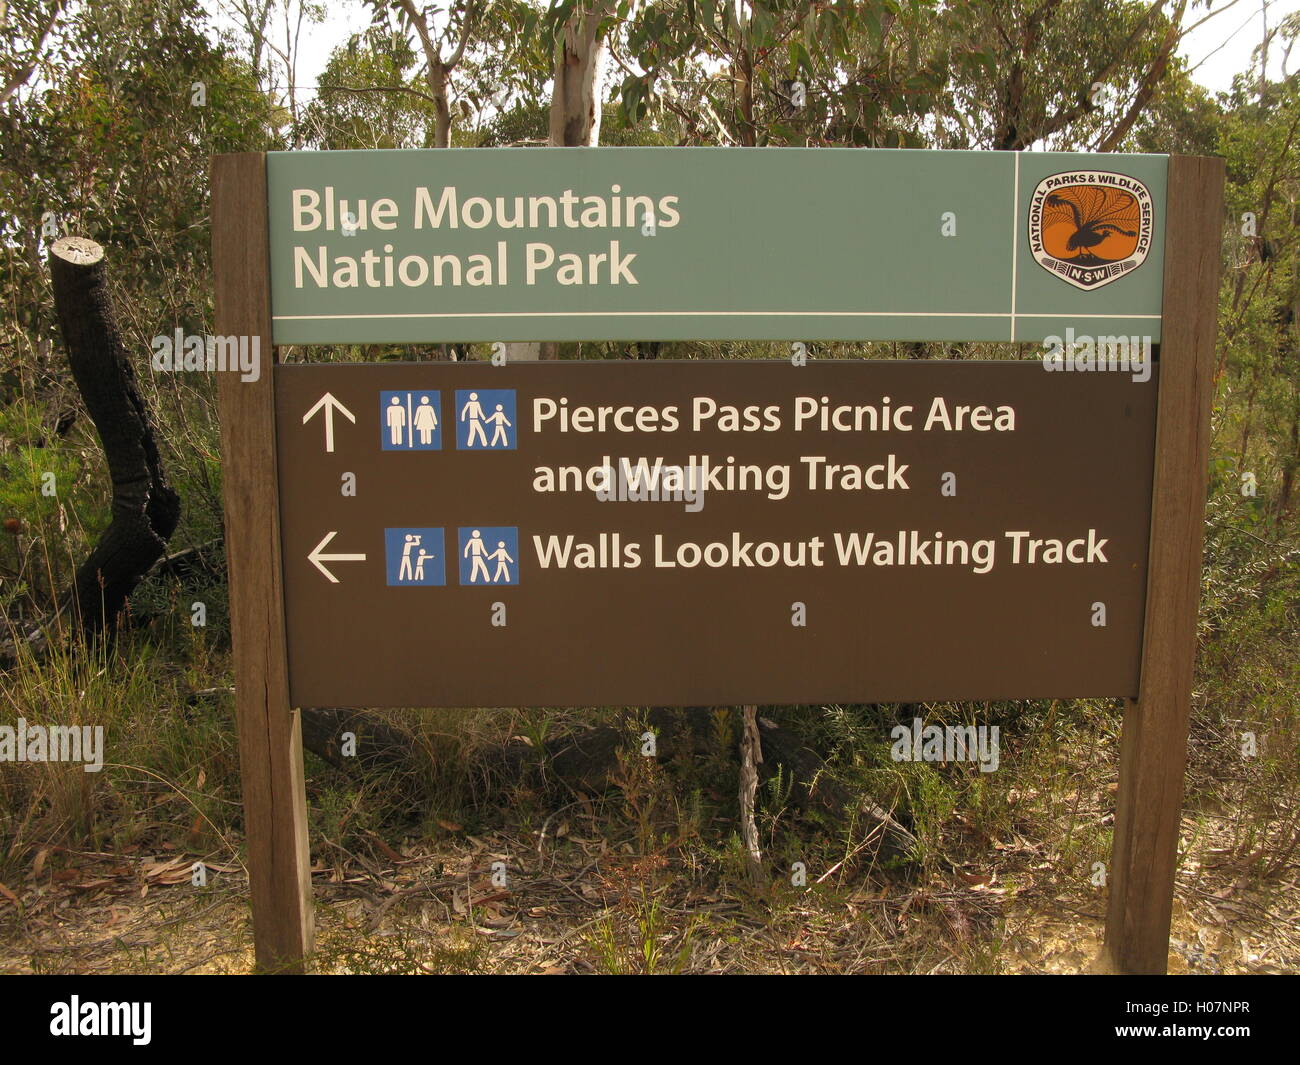 Signs for Pierces Pass and Walls Lookout Walking Tracks, Blue Mountains National Park Stock Photo